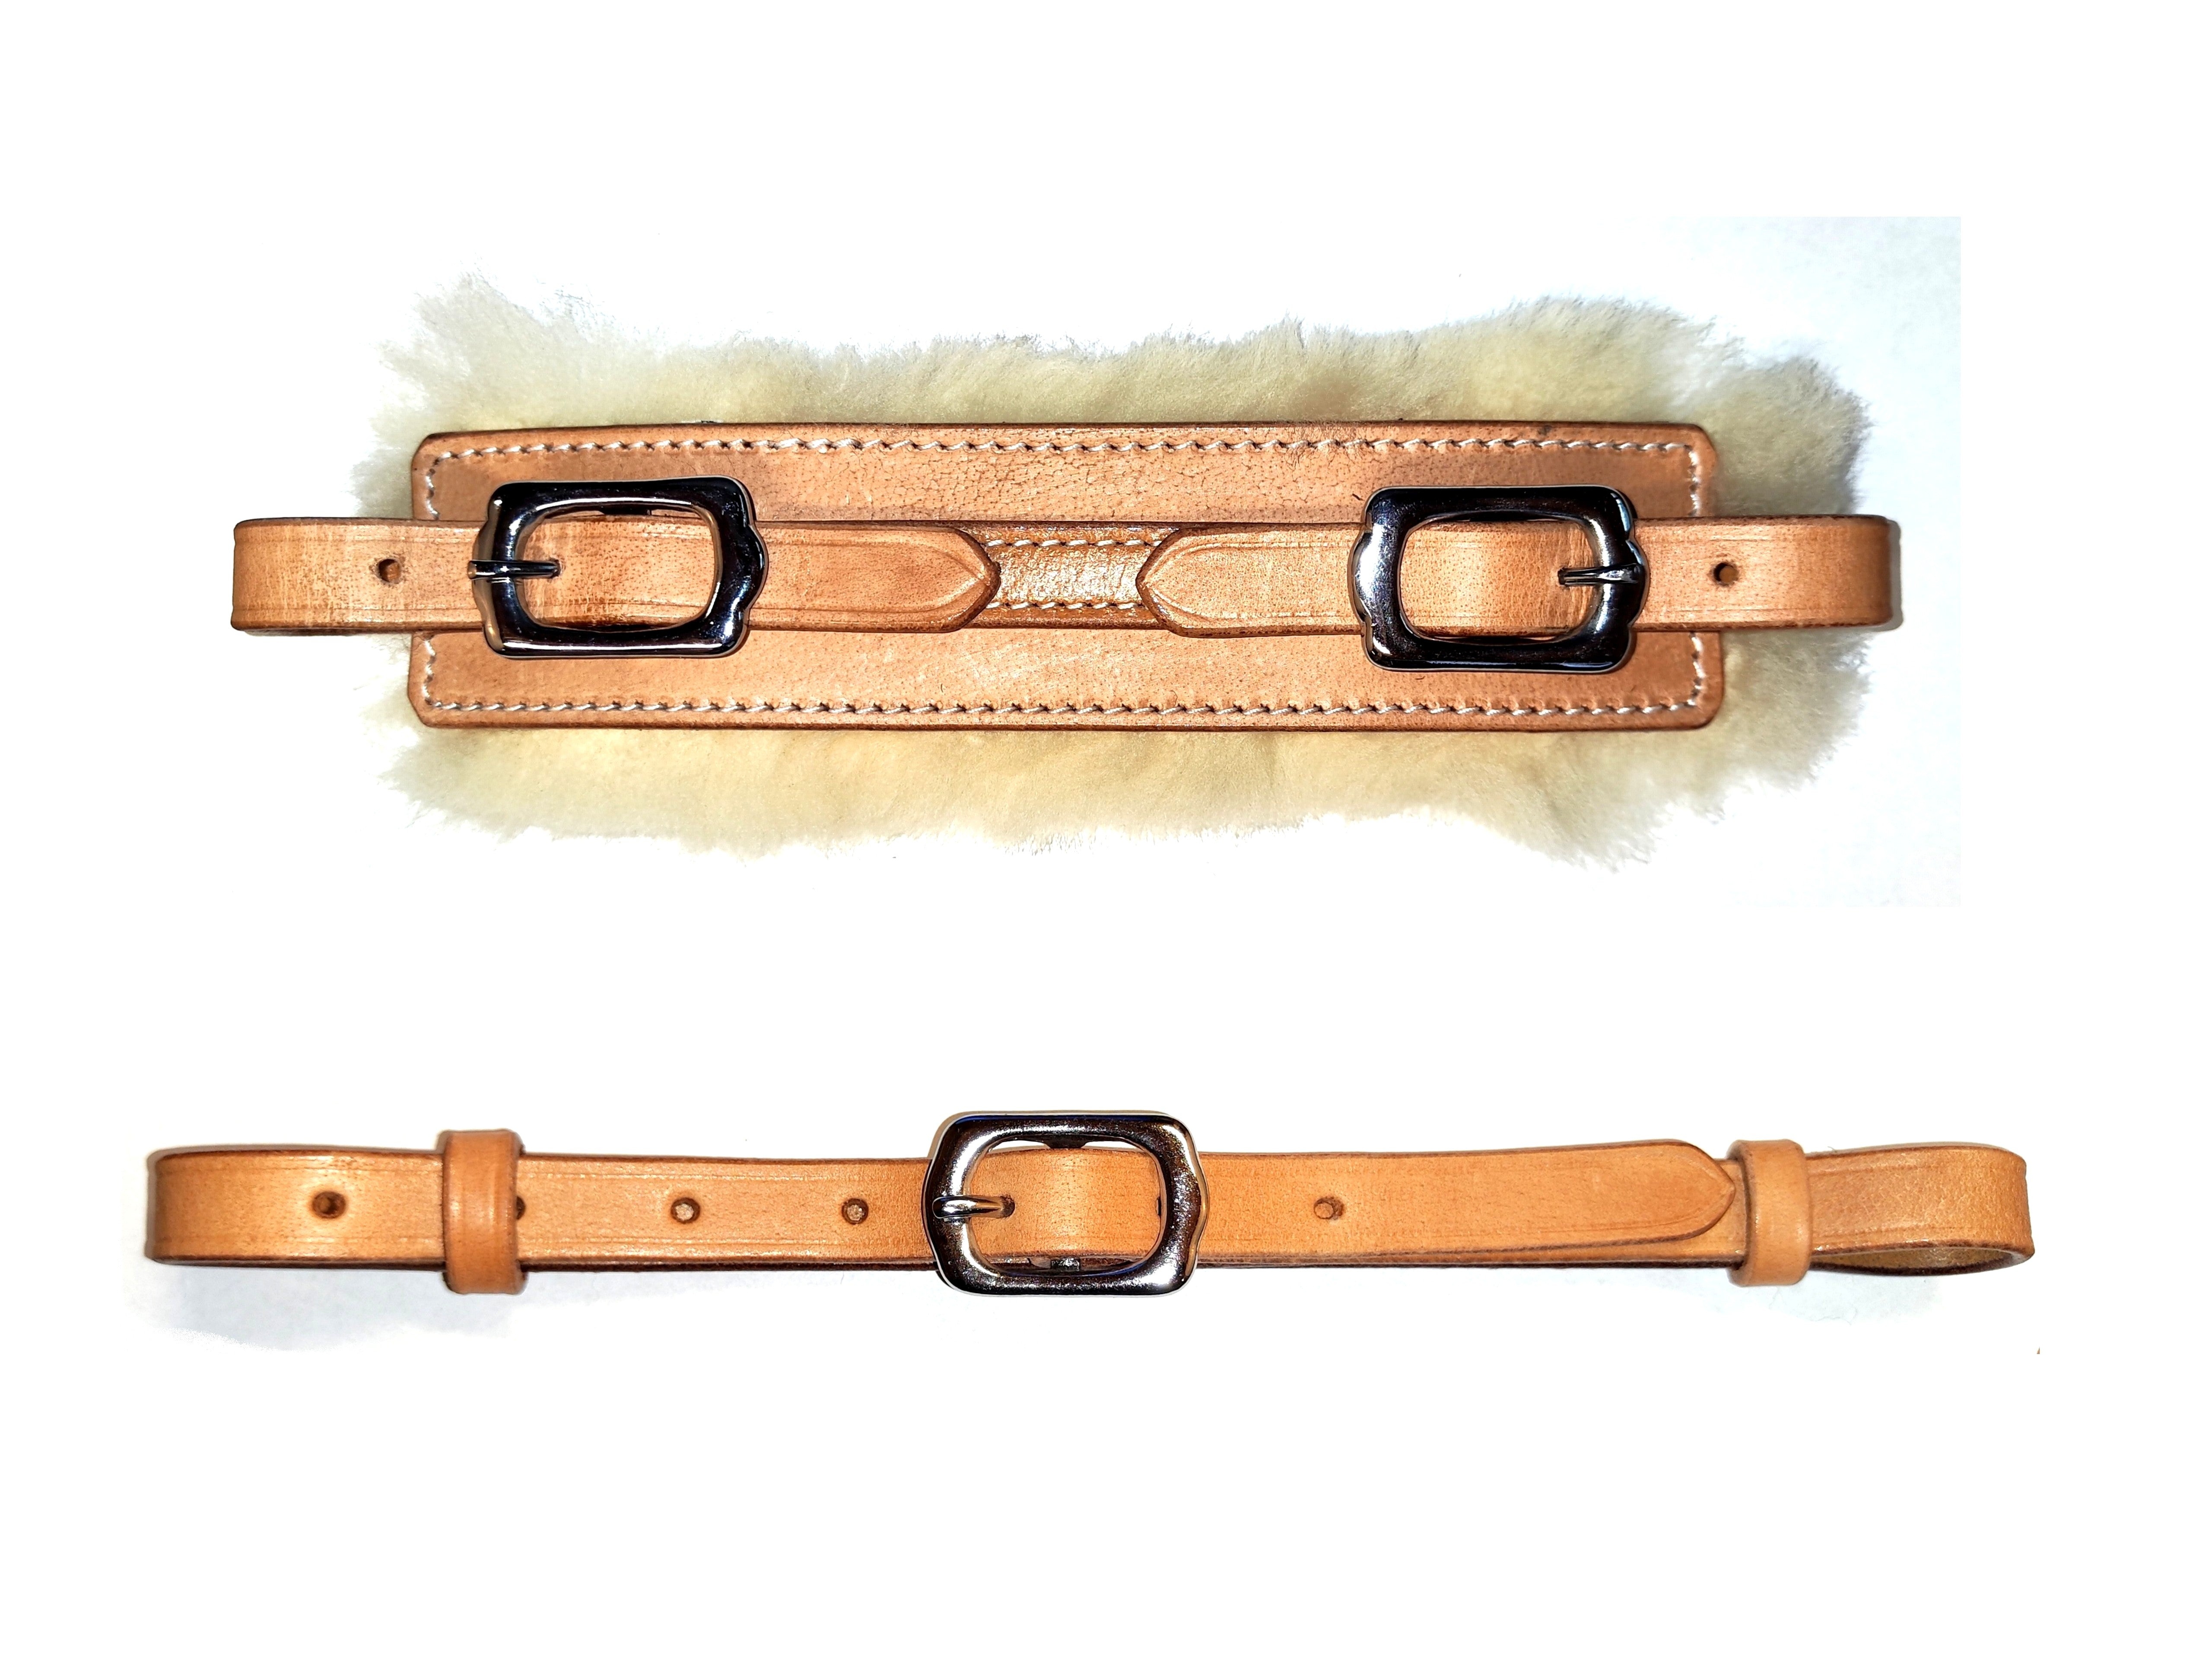 Real sheepskin padded noseband plus chin strap in a set